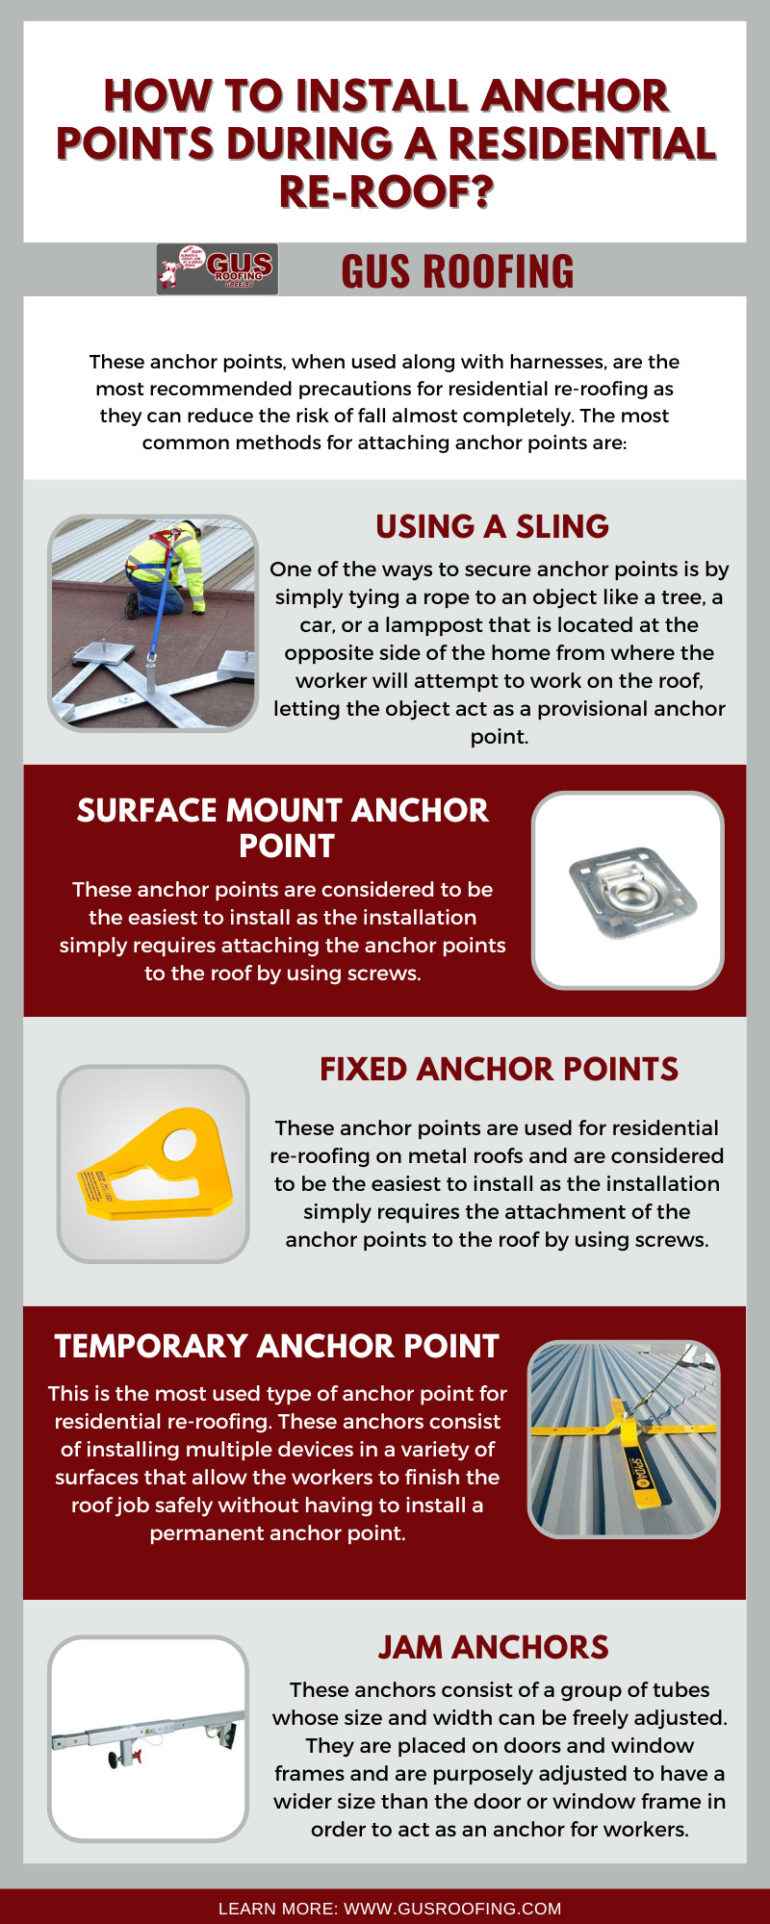 How To Install Anchor Points During A Residential Re-Roofing?